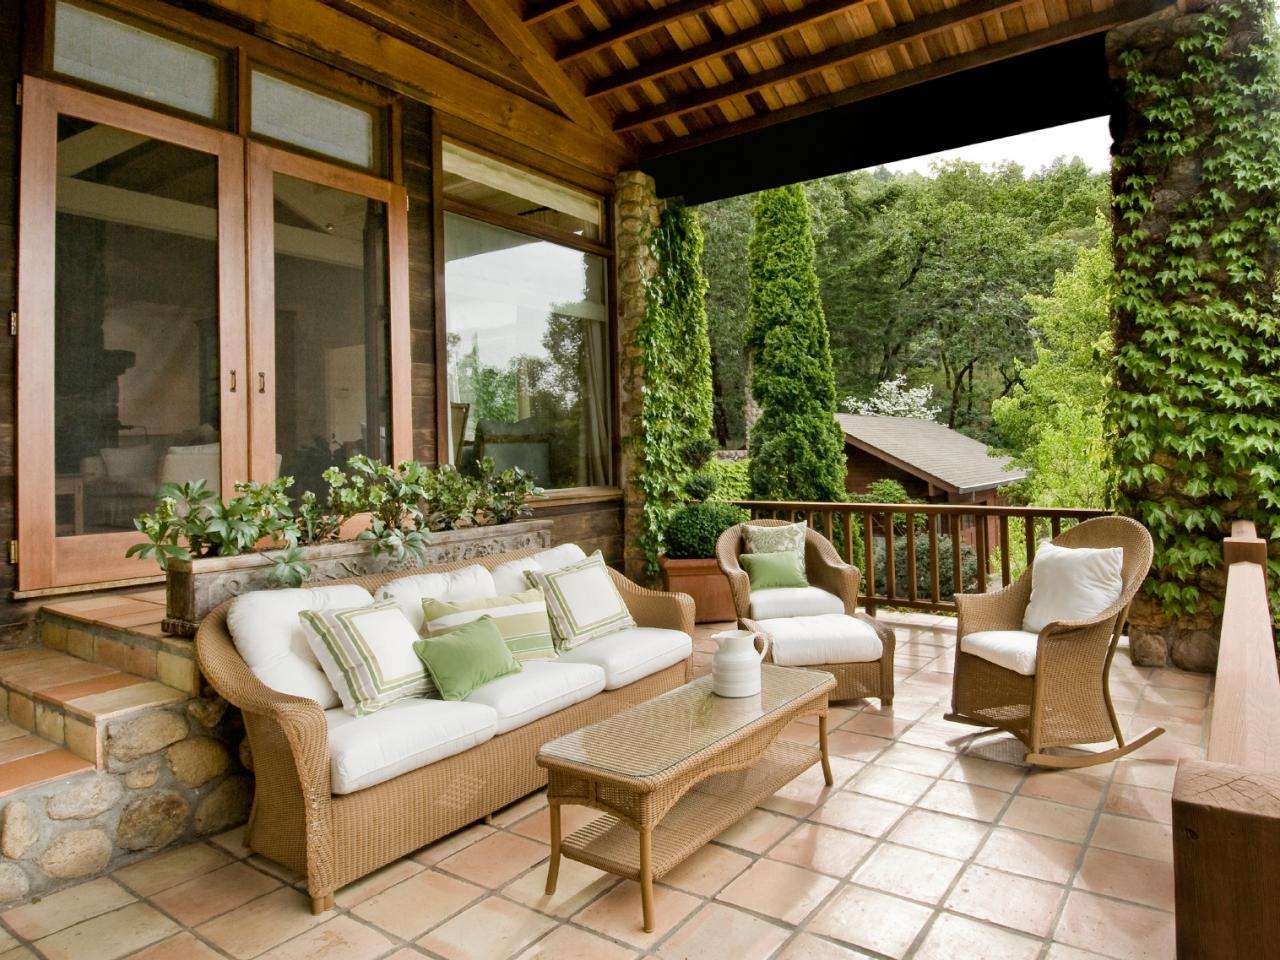 Design Tips for the Front Porch